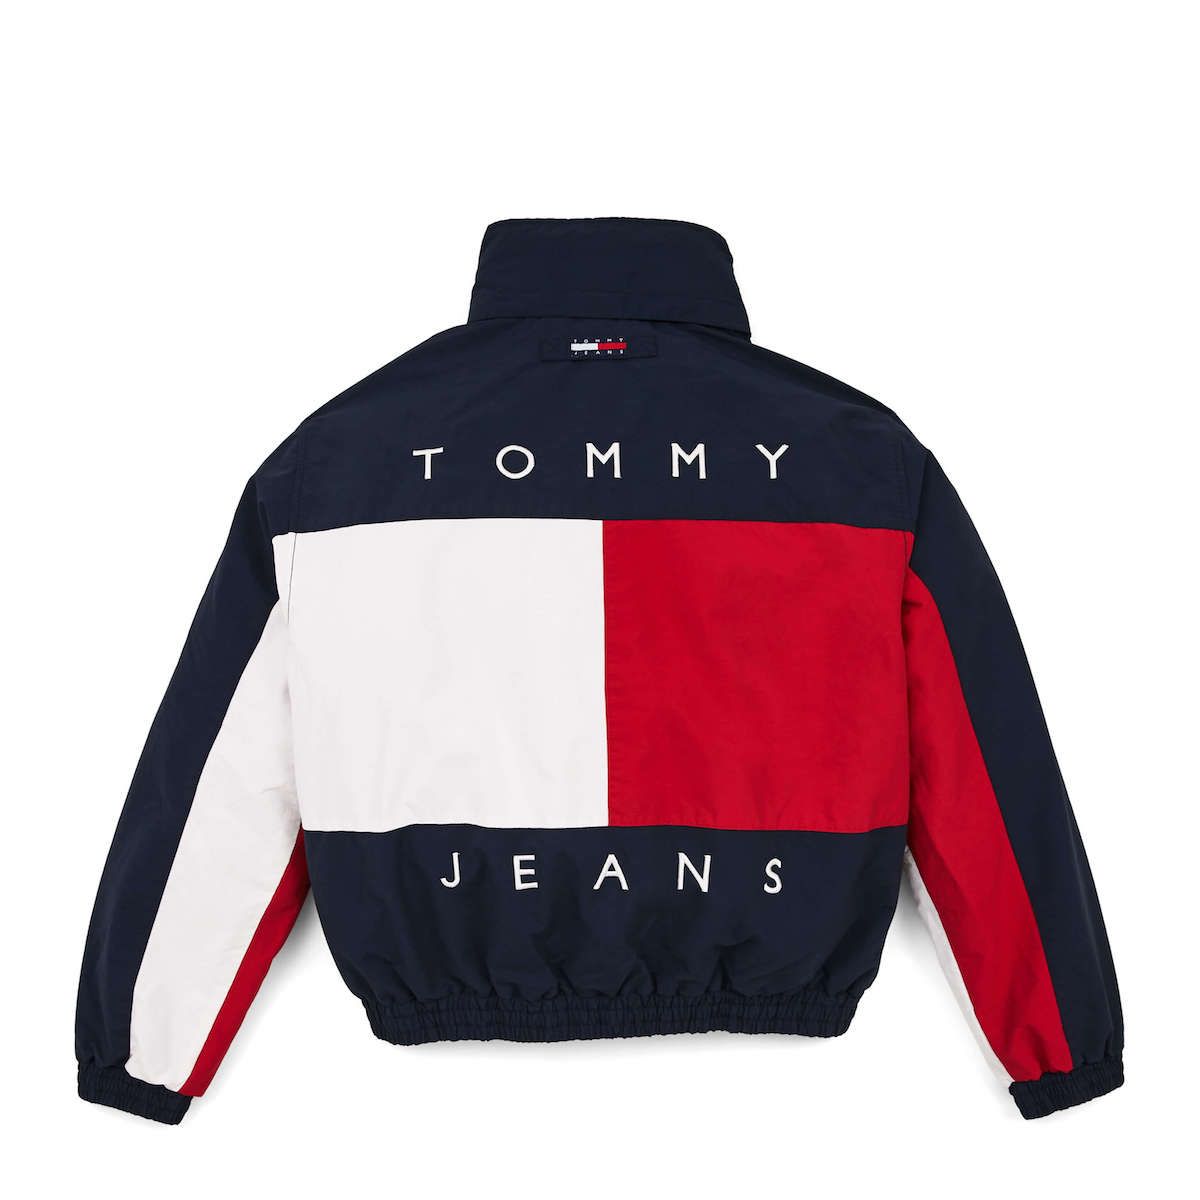 difference between tommy hilfiger and tommy jeans